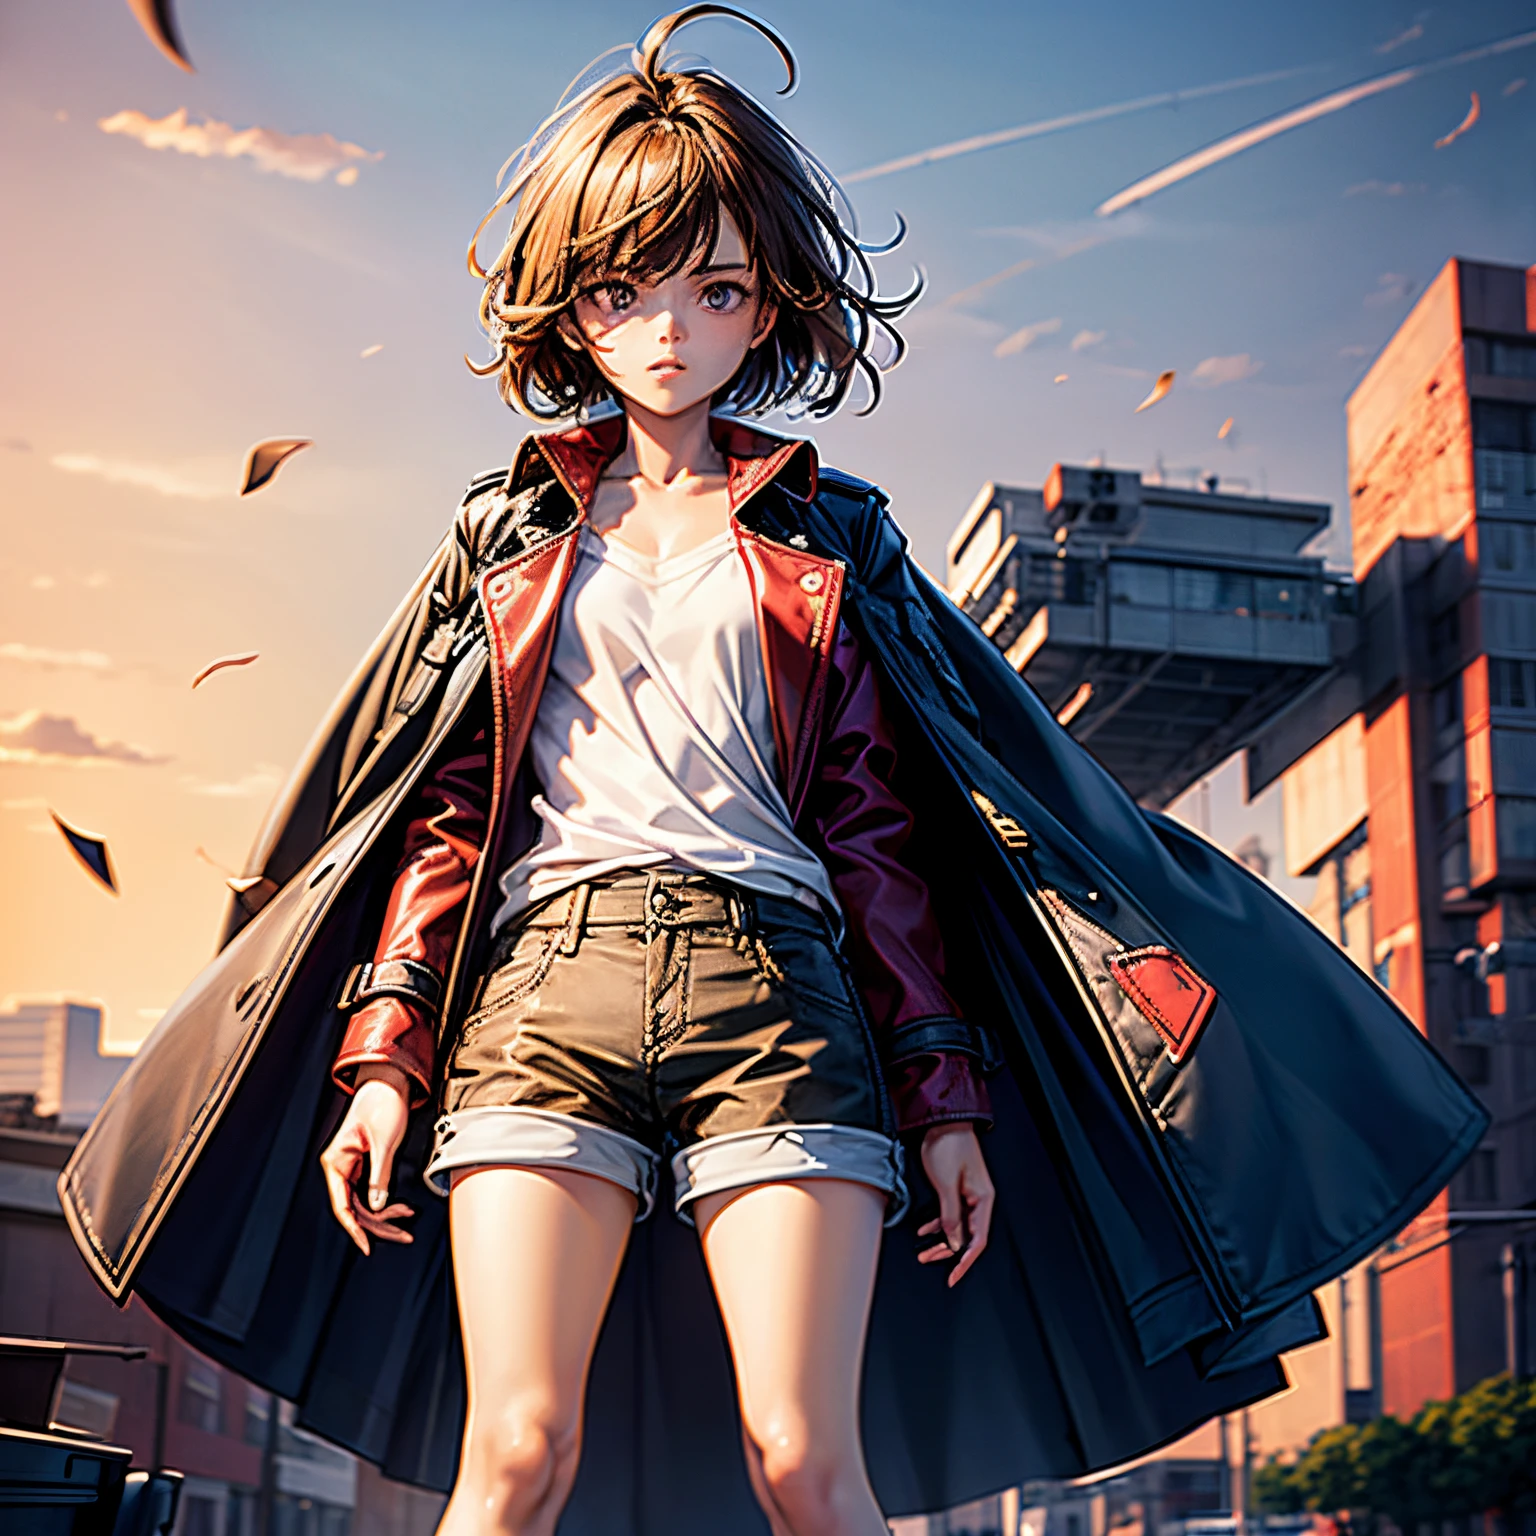 1 girl, full bodyesbian, Full-body image, Crimson trench coat, white  shirt, Dark blue cargo shorts, Cool girl,The chest is very flat, Very young girl, A girl around 15 years old, Yellow-brown hair,, asymmetricalbangs, expressive hair, Medium hair, Hair flakes, Pointed hair, actual,  8K, super detailing, hyper HD, tmasterpiece, Anatomically correct, super detailing, high high quality, Best quality